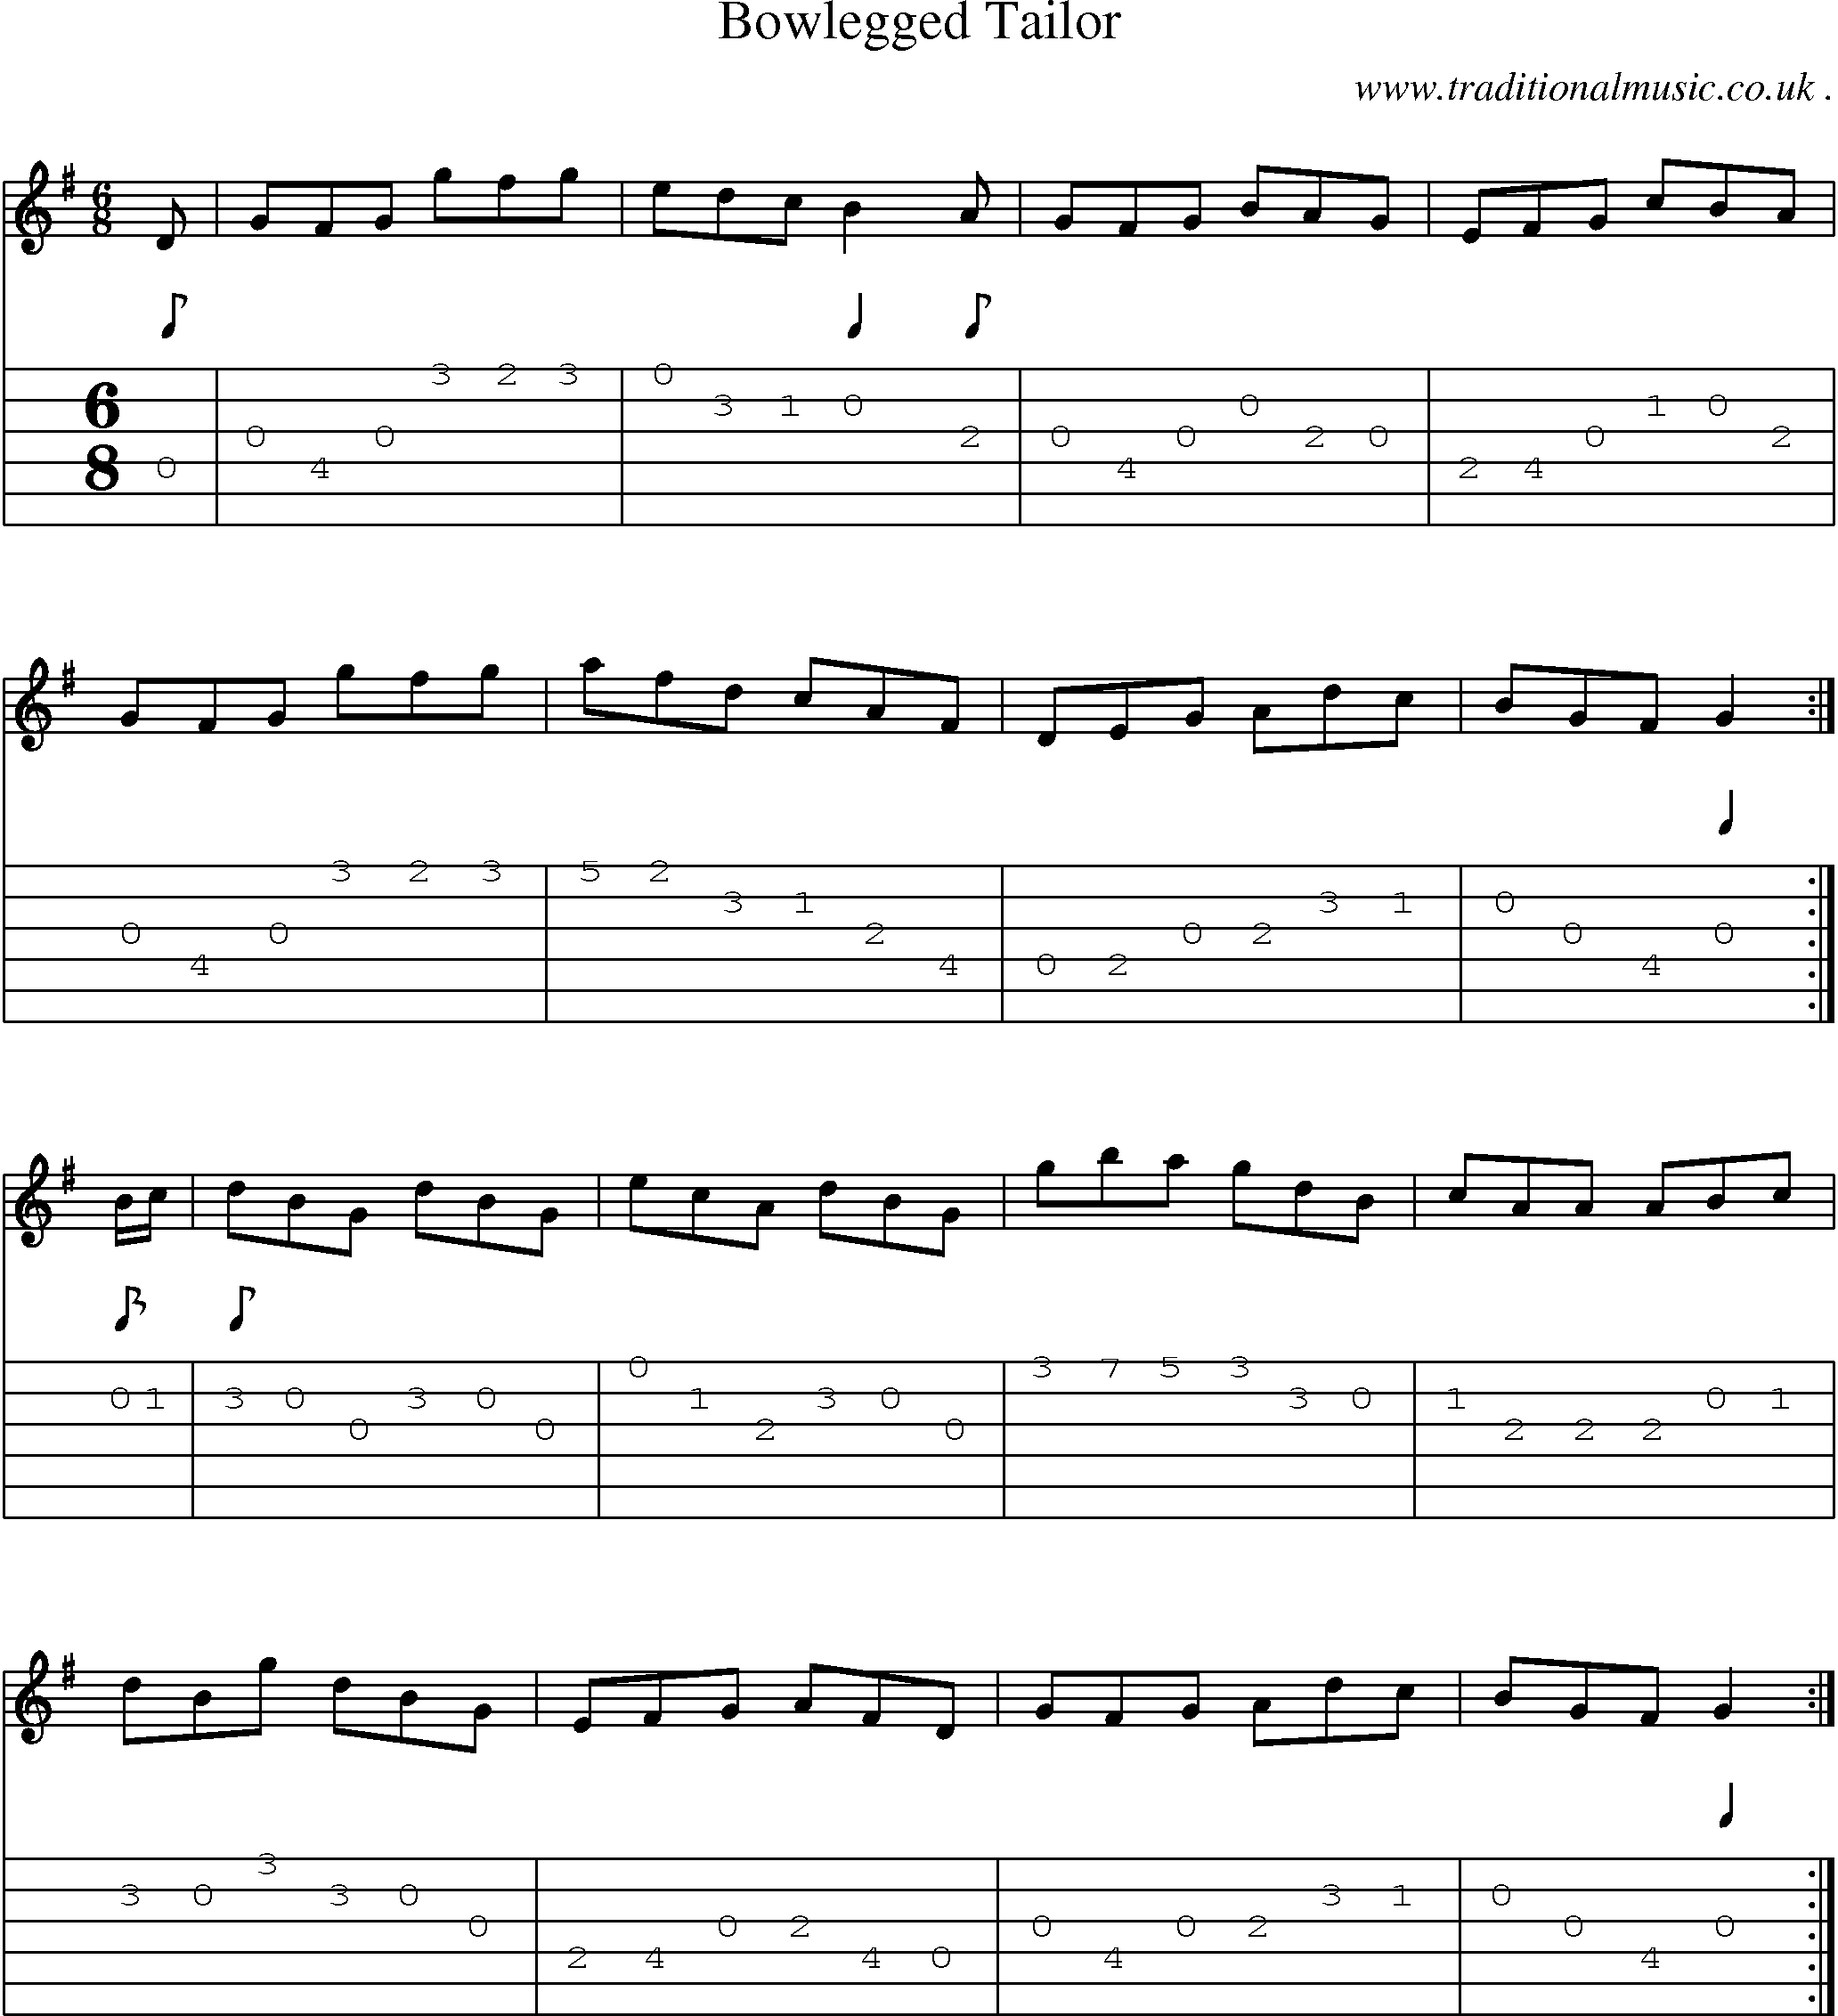 Sheet-Music and Guitar Tabs for Bowlegged Tailor